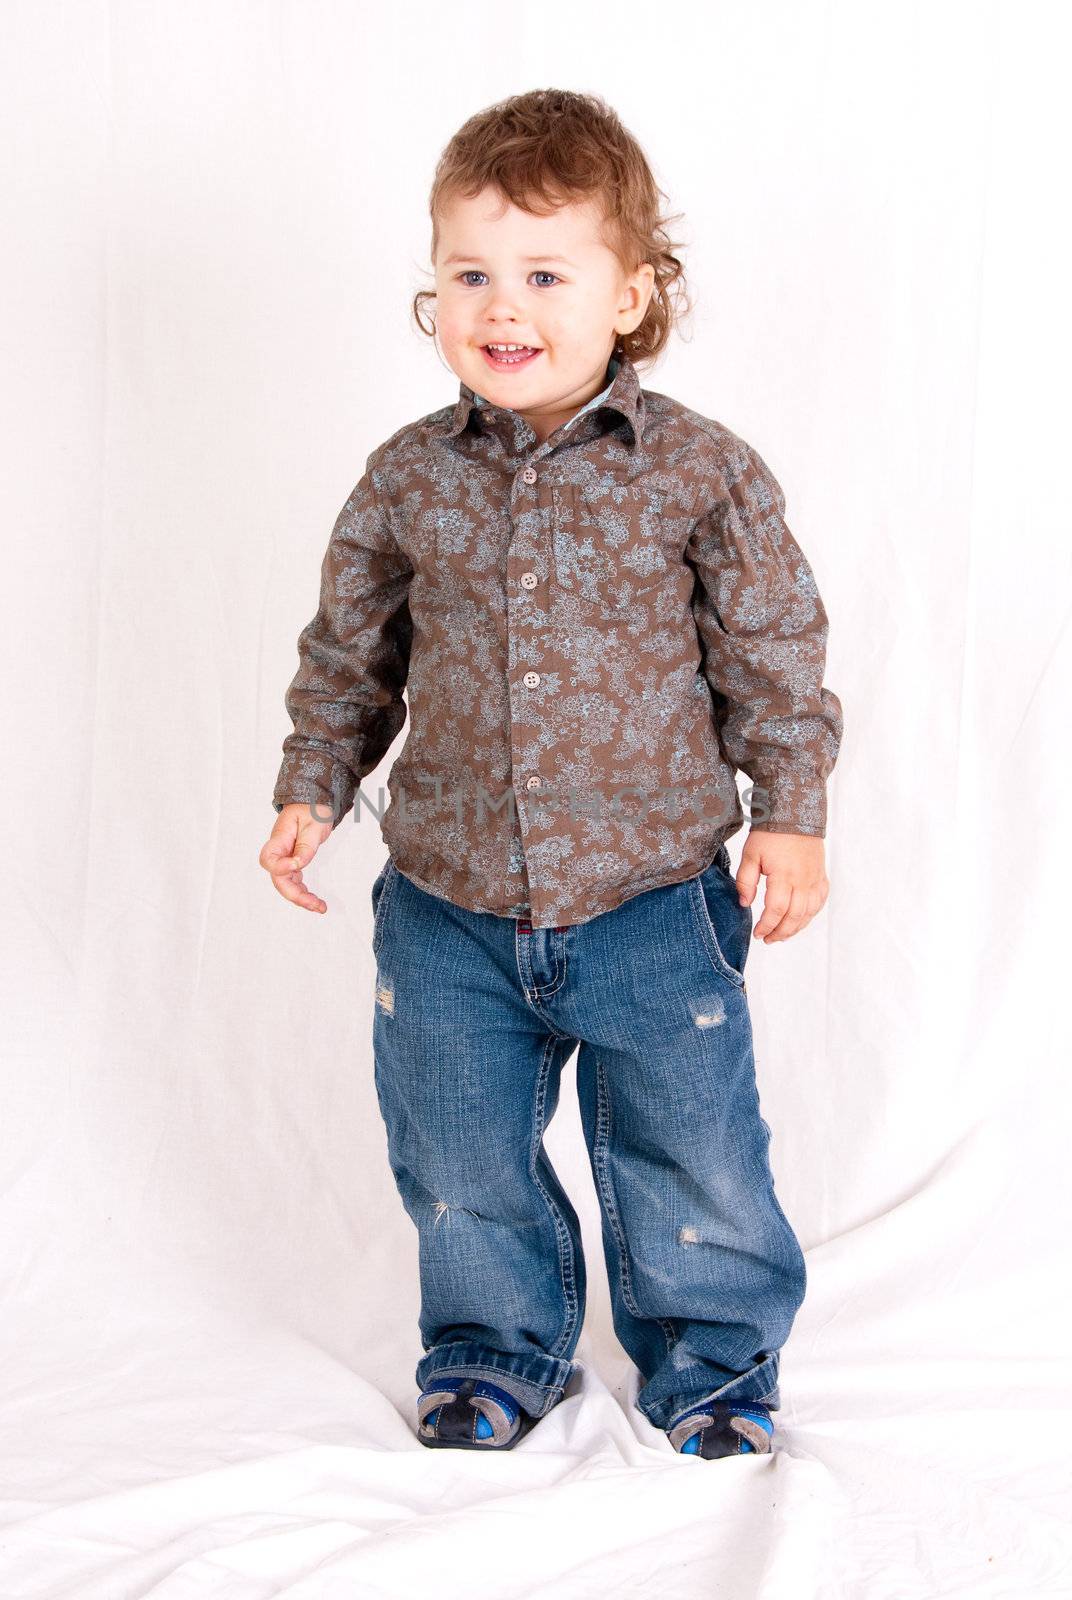 Portrait of 2 years old boy made in studio